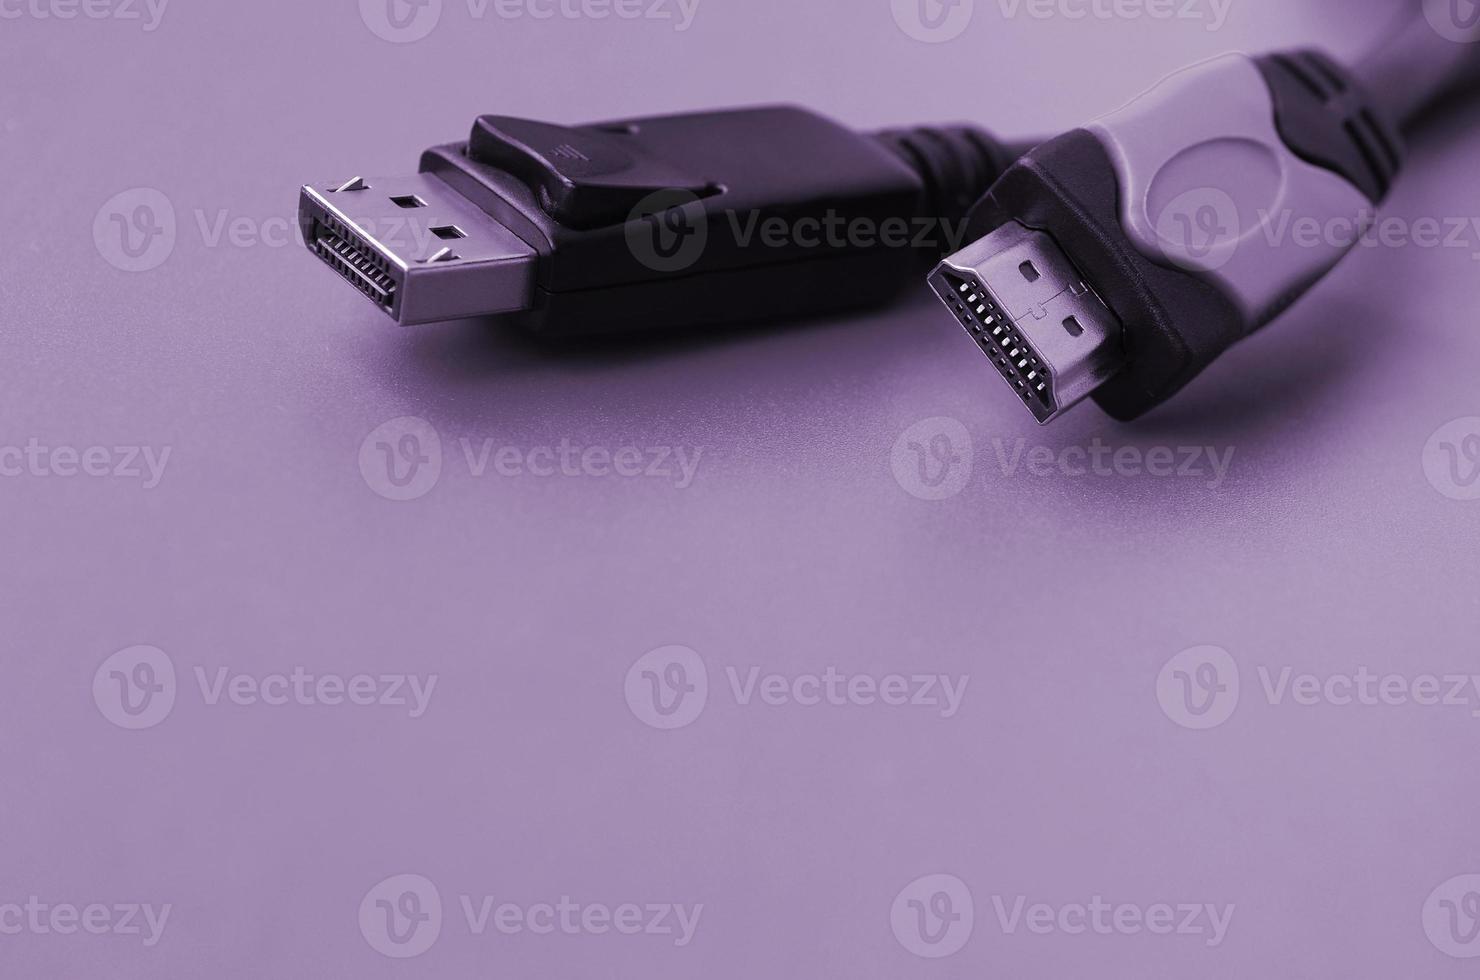 Audio video HDMI computer cable plug and 20-pin male DisplayPort gold plated connector for a flawless connection on purple backdrop photo